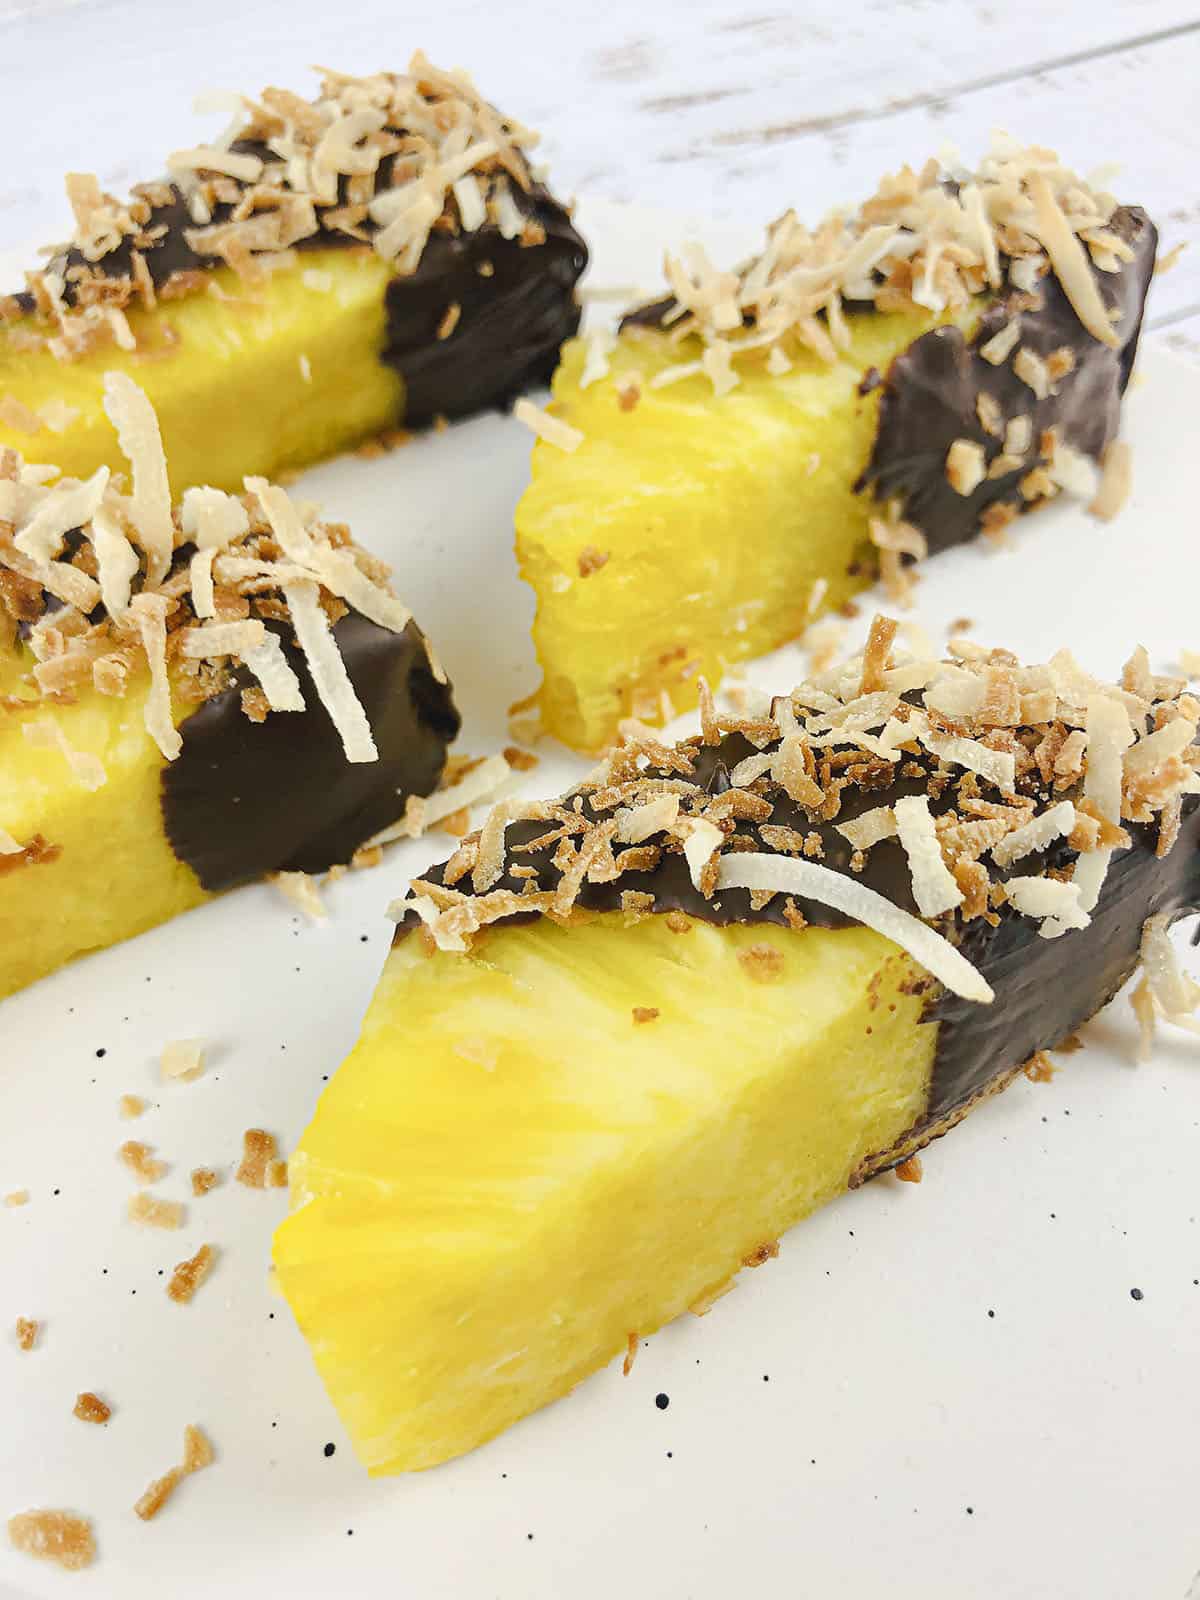 4 Chocolate dipped pineapple spears on a cutting board.